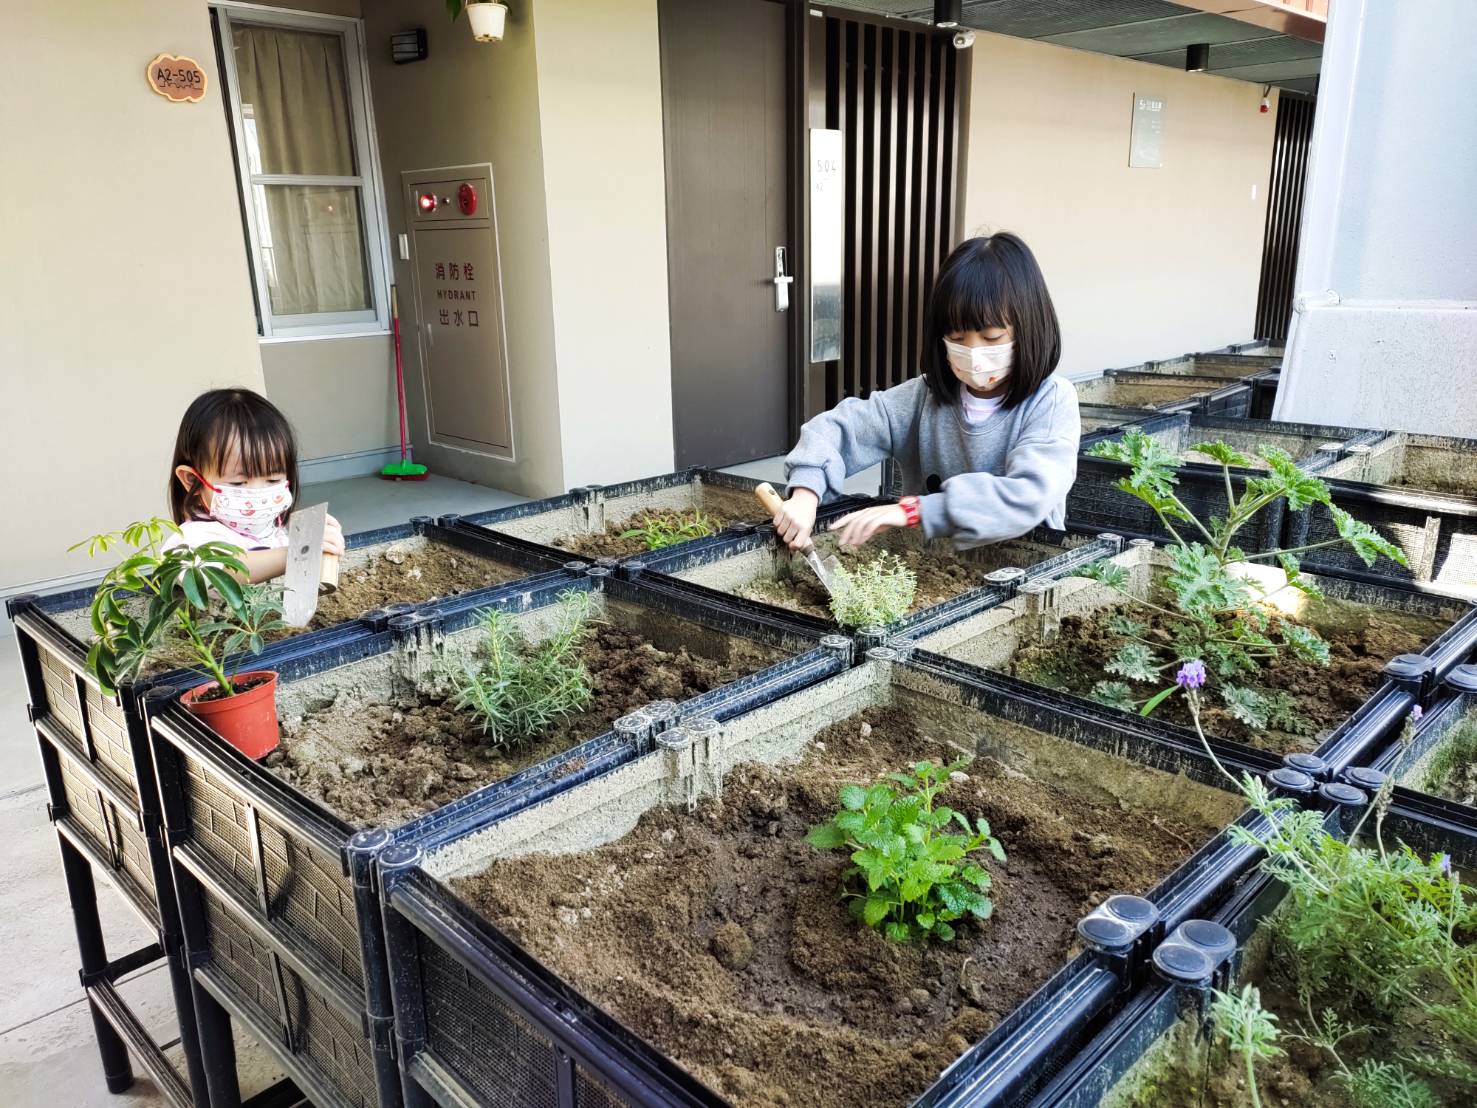 Residents are taking care of plants in the balcony garden.